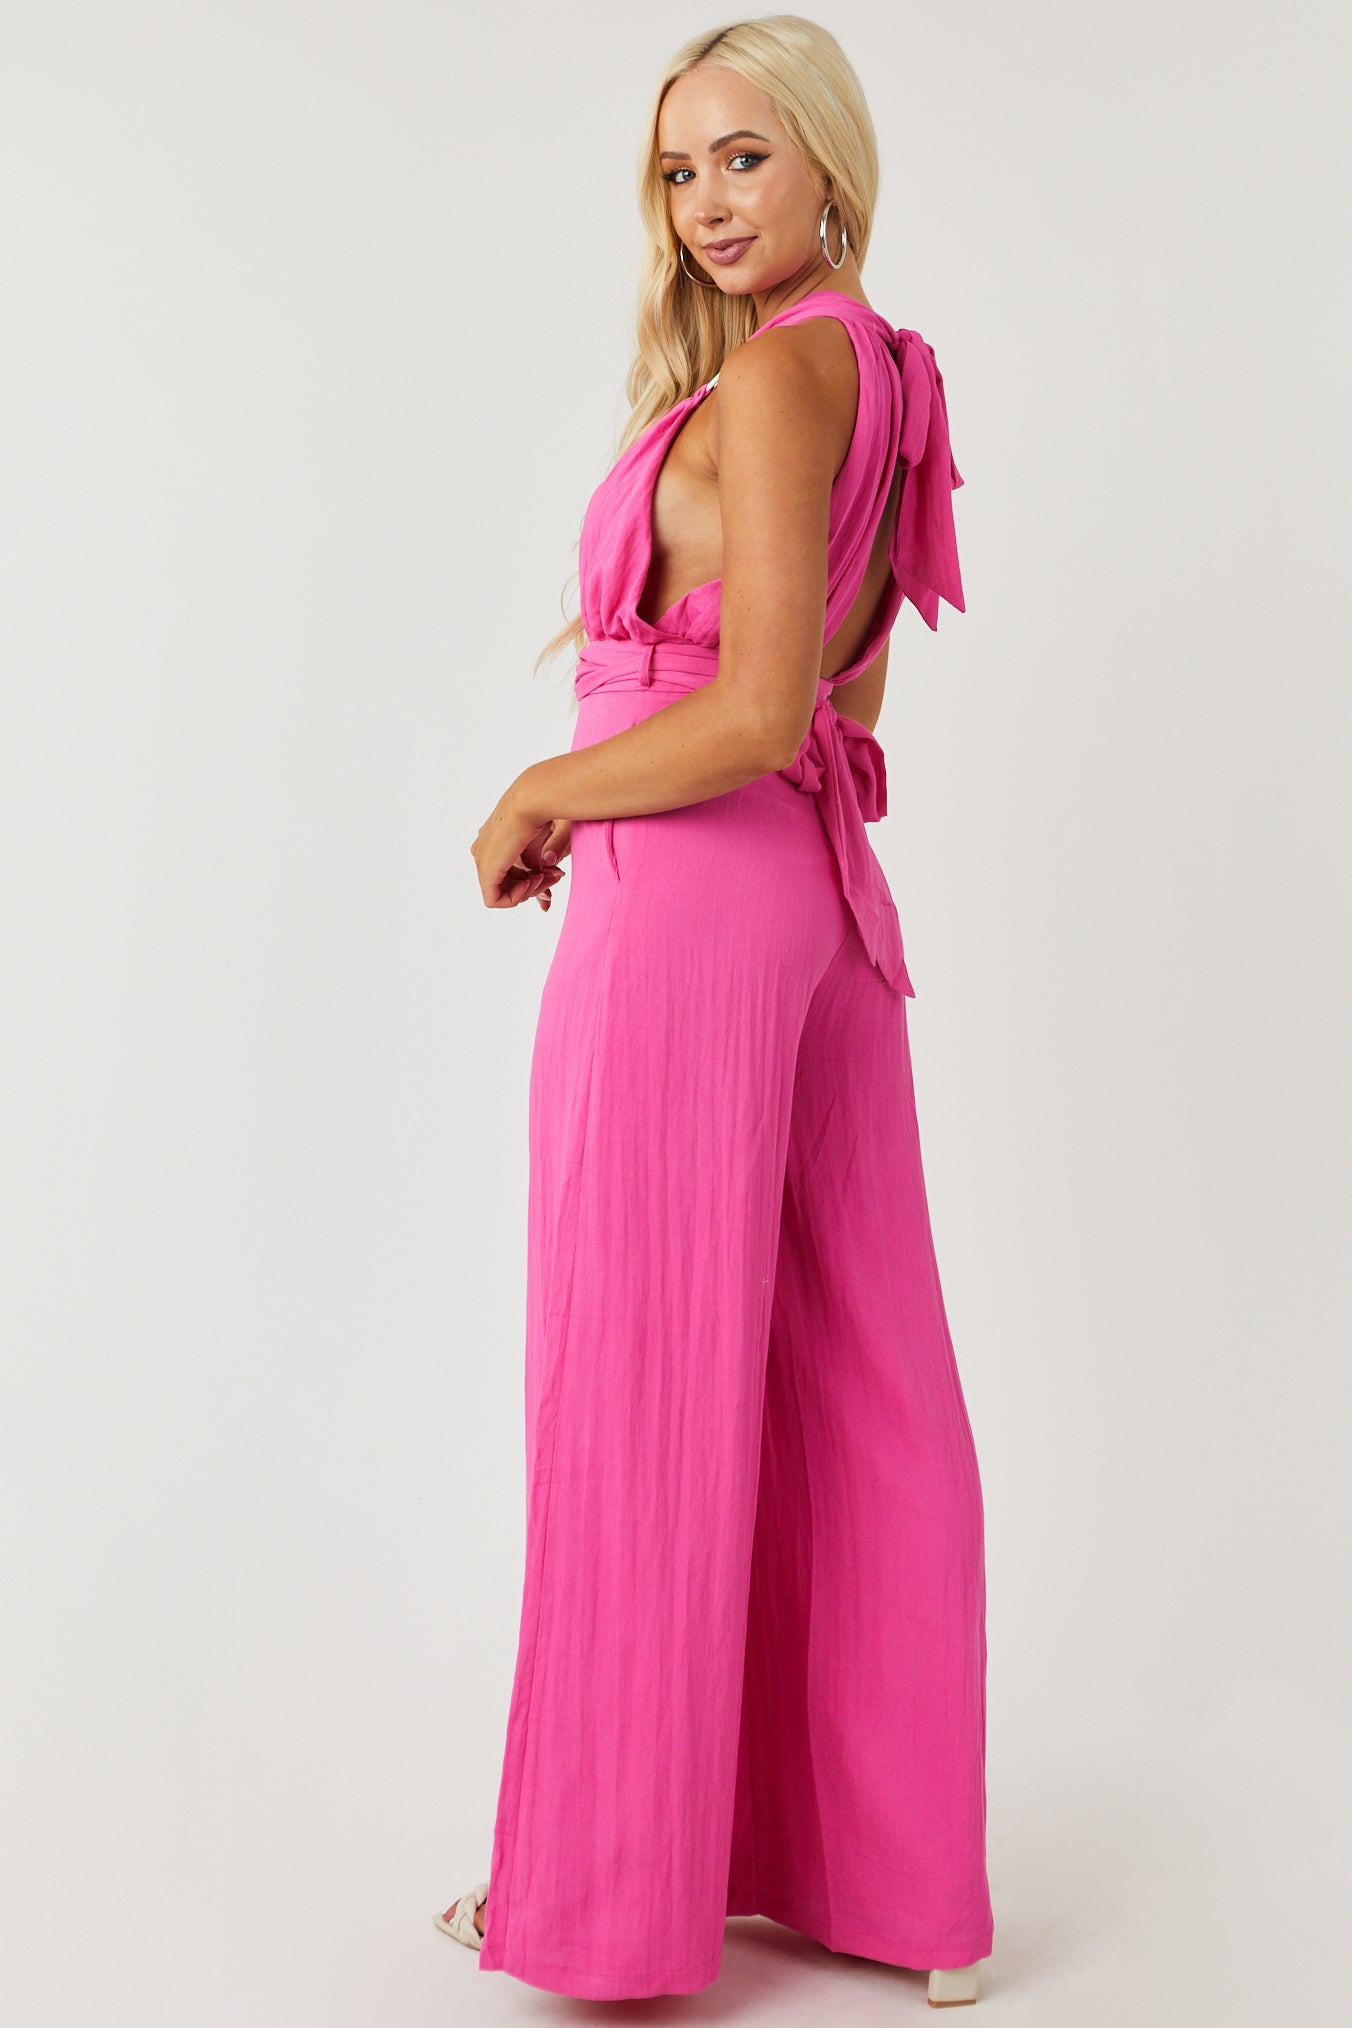 Vibrant Pink Plunging Neck O-Ring Jumpsuit